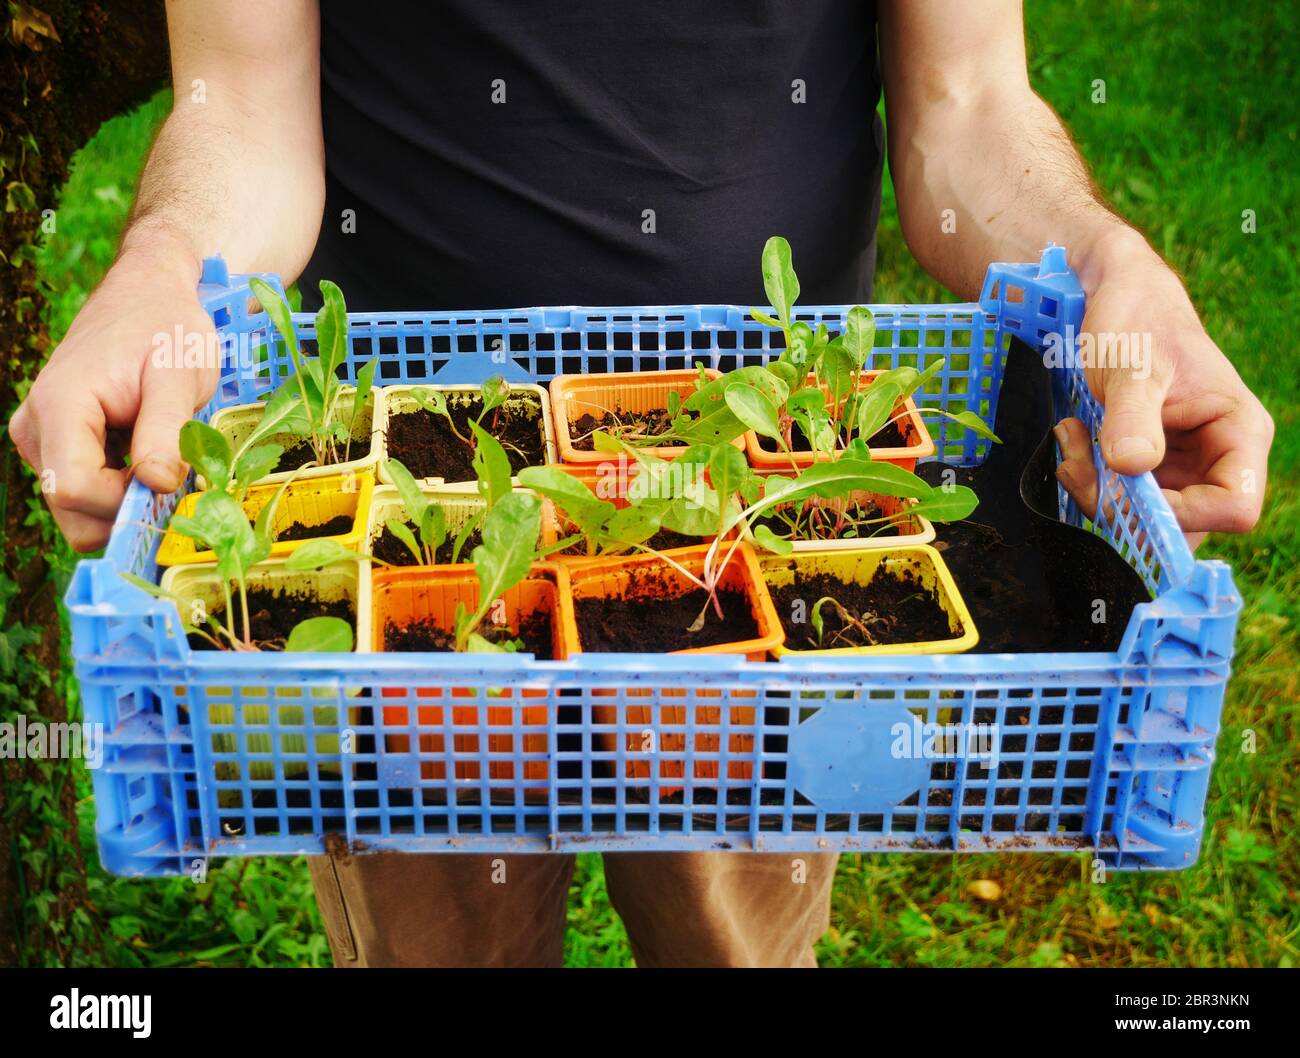 Farmer holding a crate full of small green salad shoots Stock Photo